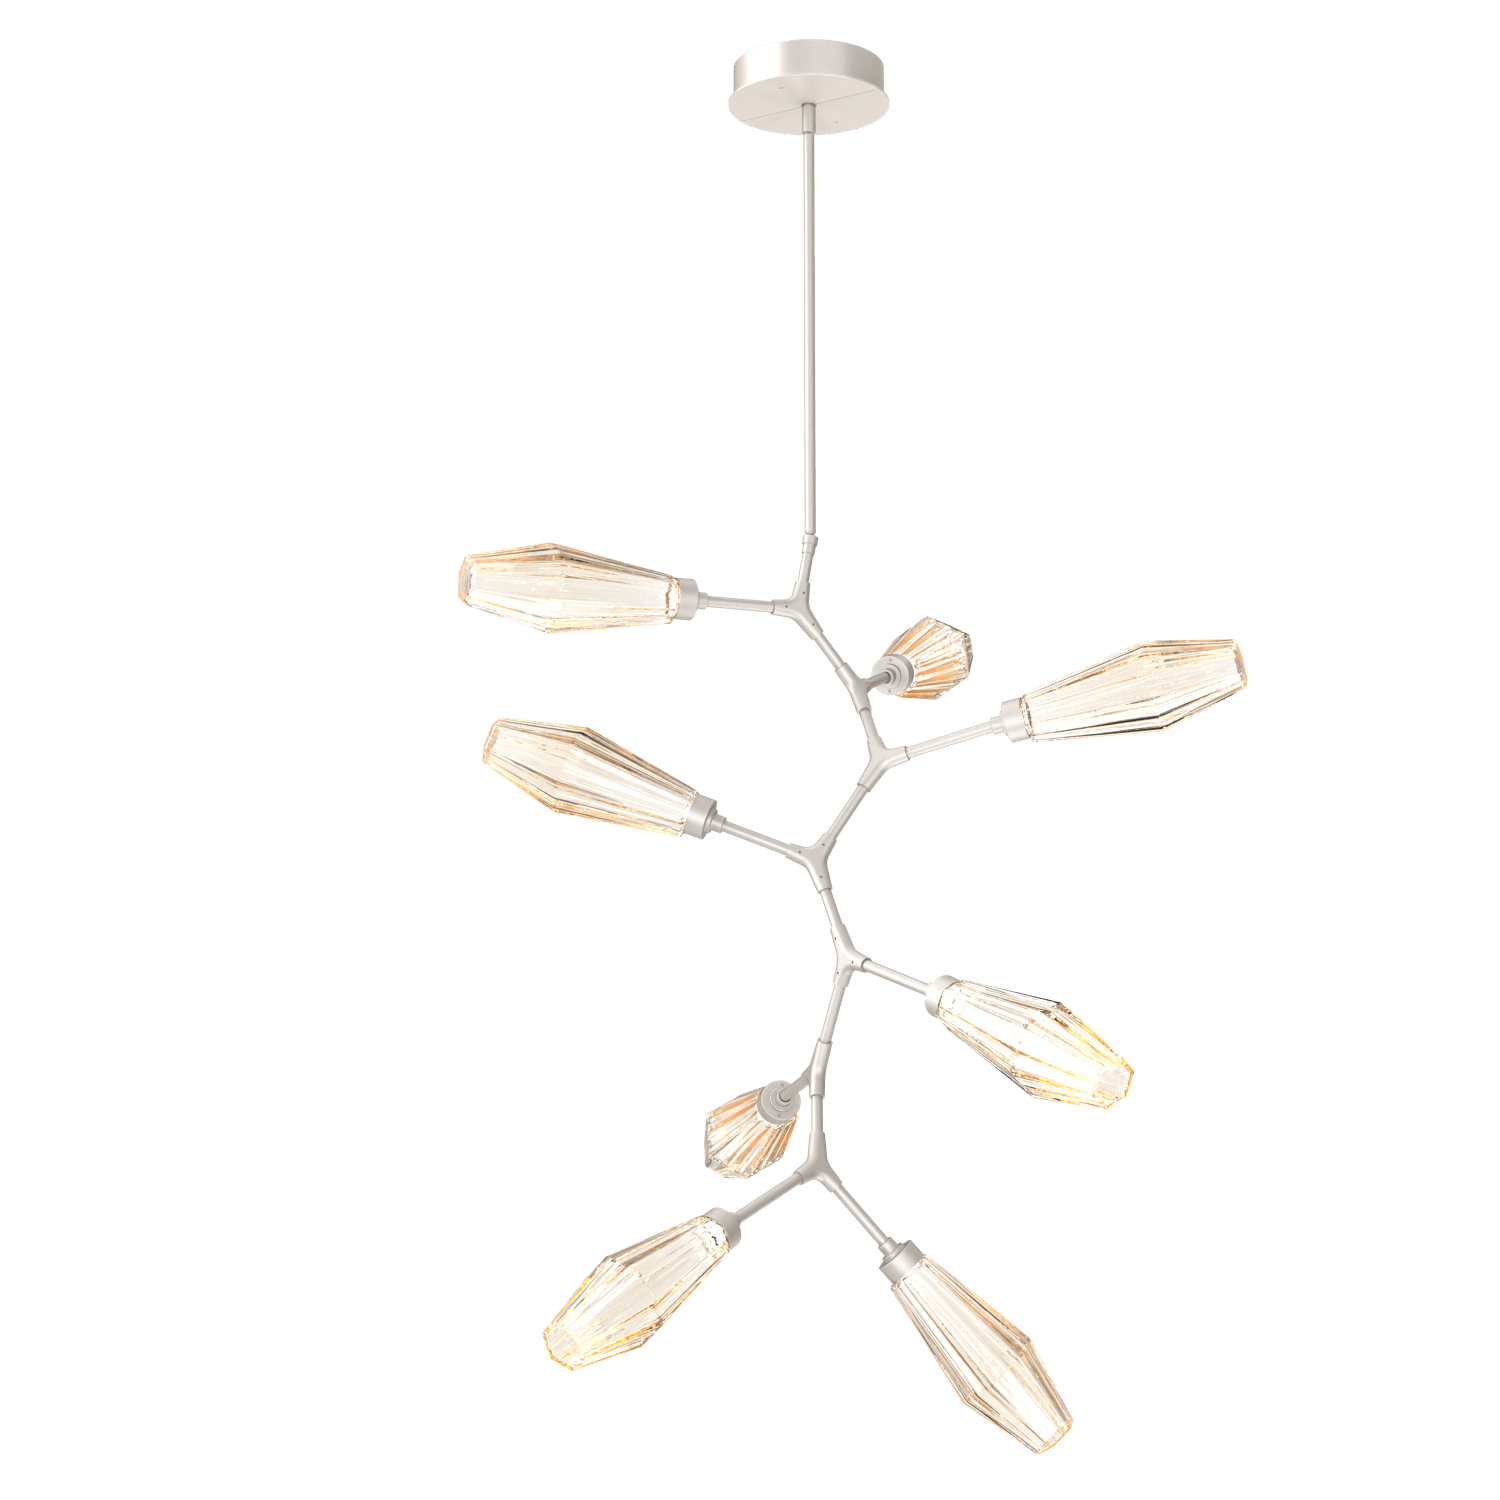 CHB0049-VB-BS-RA-Hammerton-Studio-Aalto-8-light-modern-vine-chandelier-with-metallic-beige-silver-finish-and-optic-ribbed-amber-glass-shades-and-LED-lamping